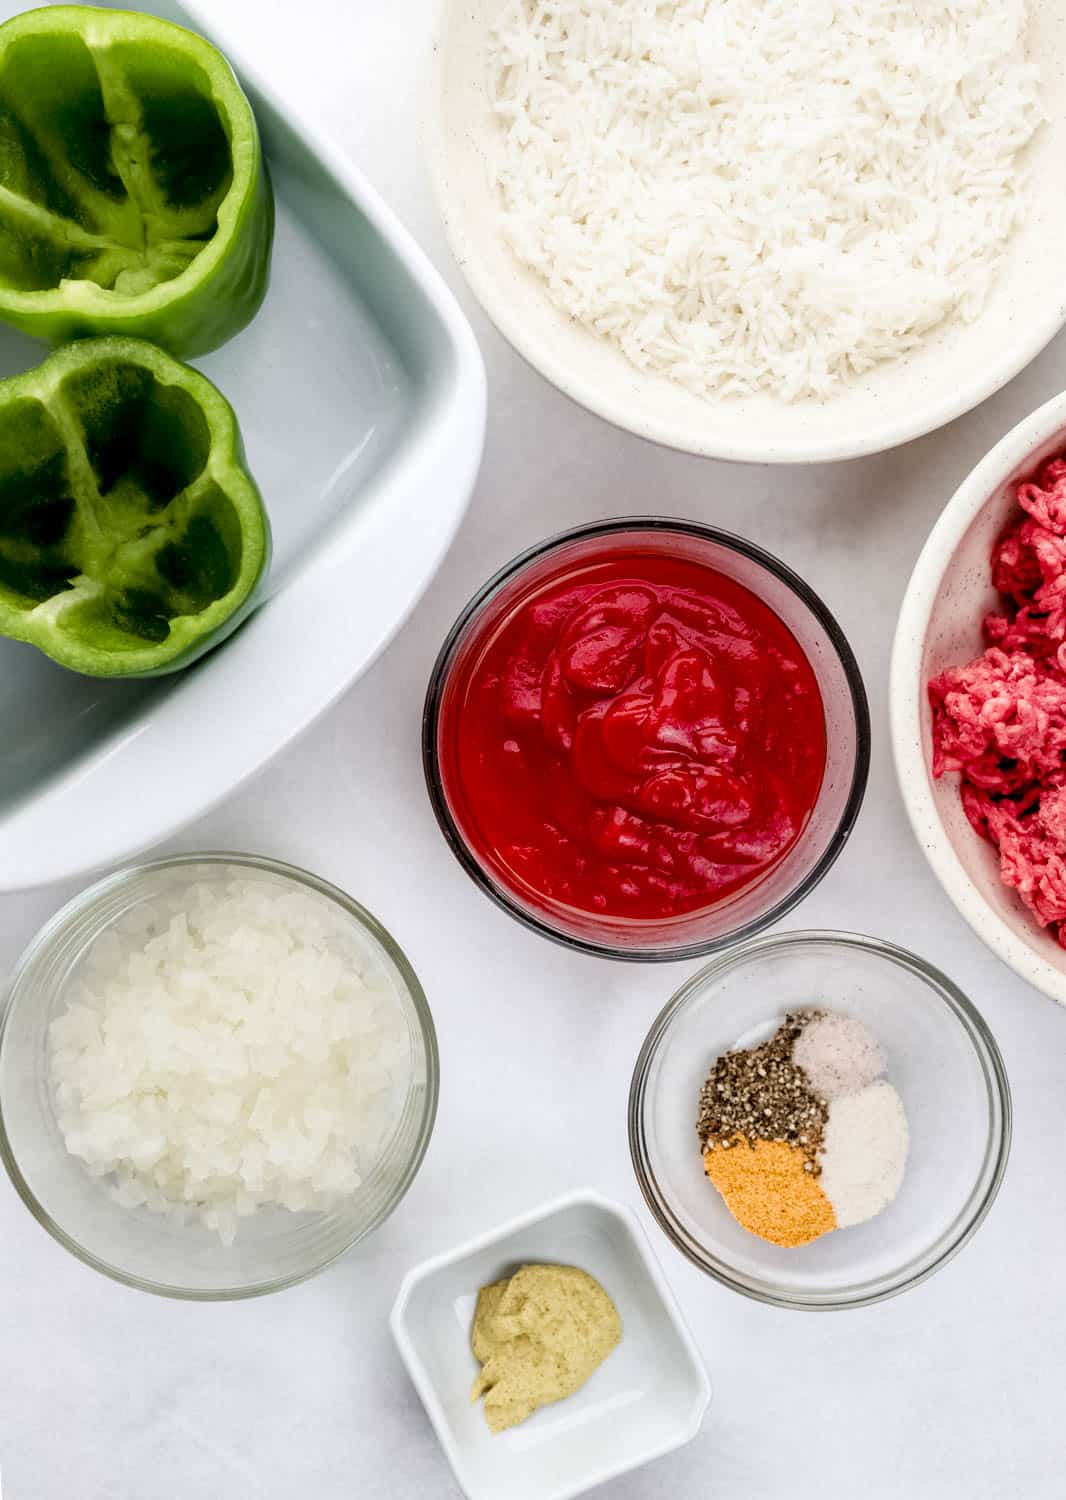 Overhead view of ingredients needed to make stuffed peppers in separate bowls on white surface. 